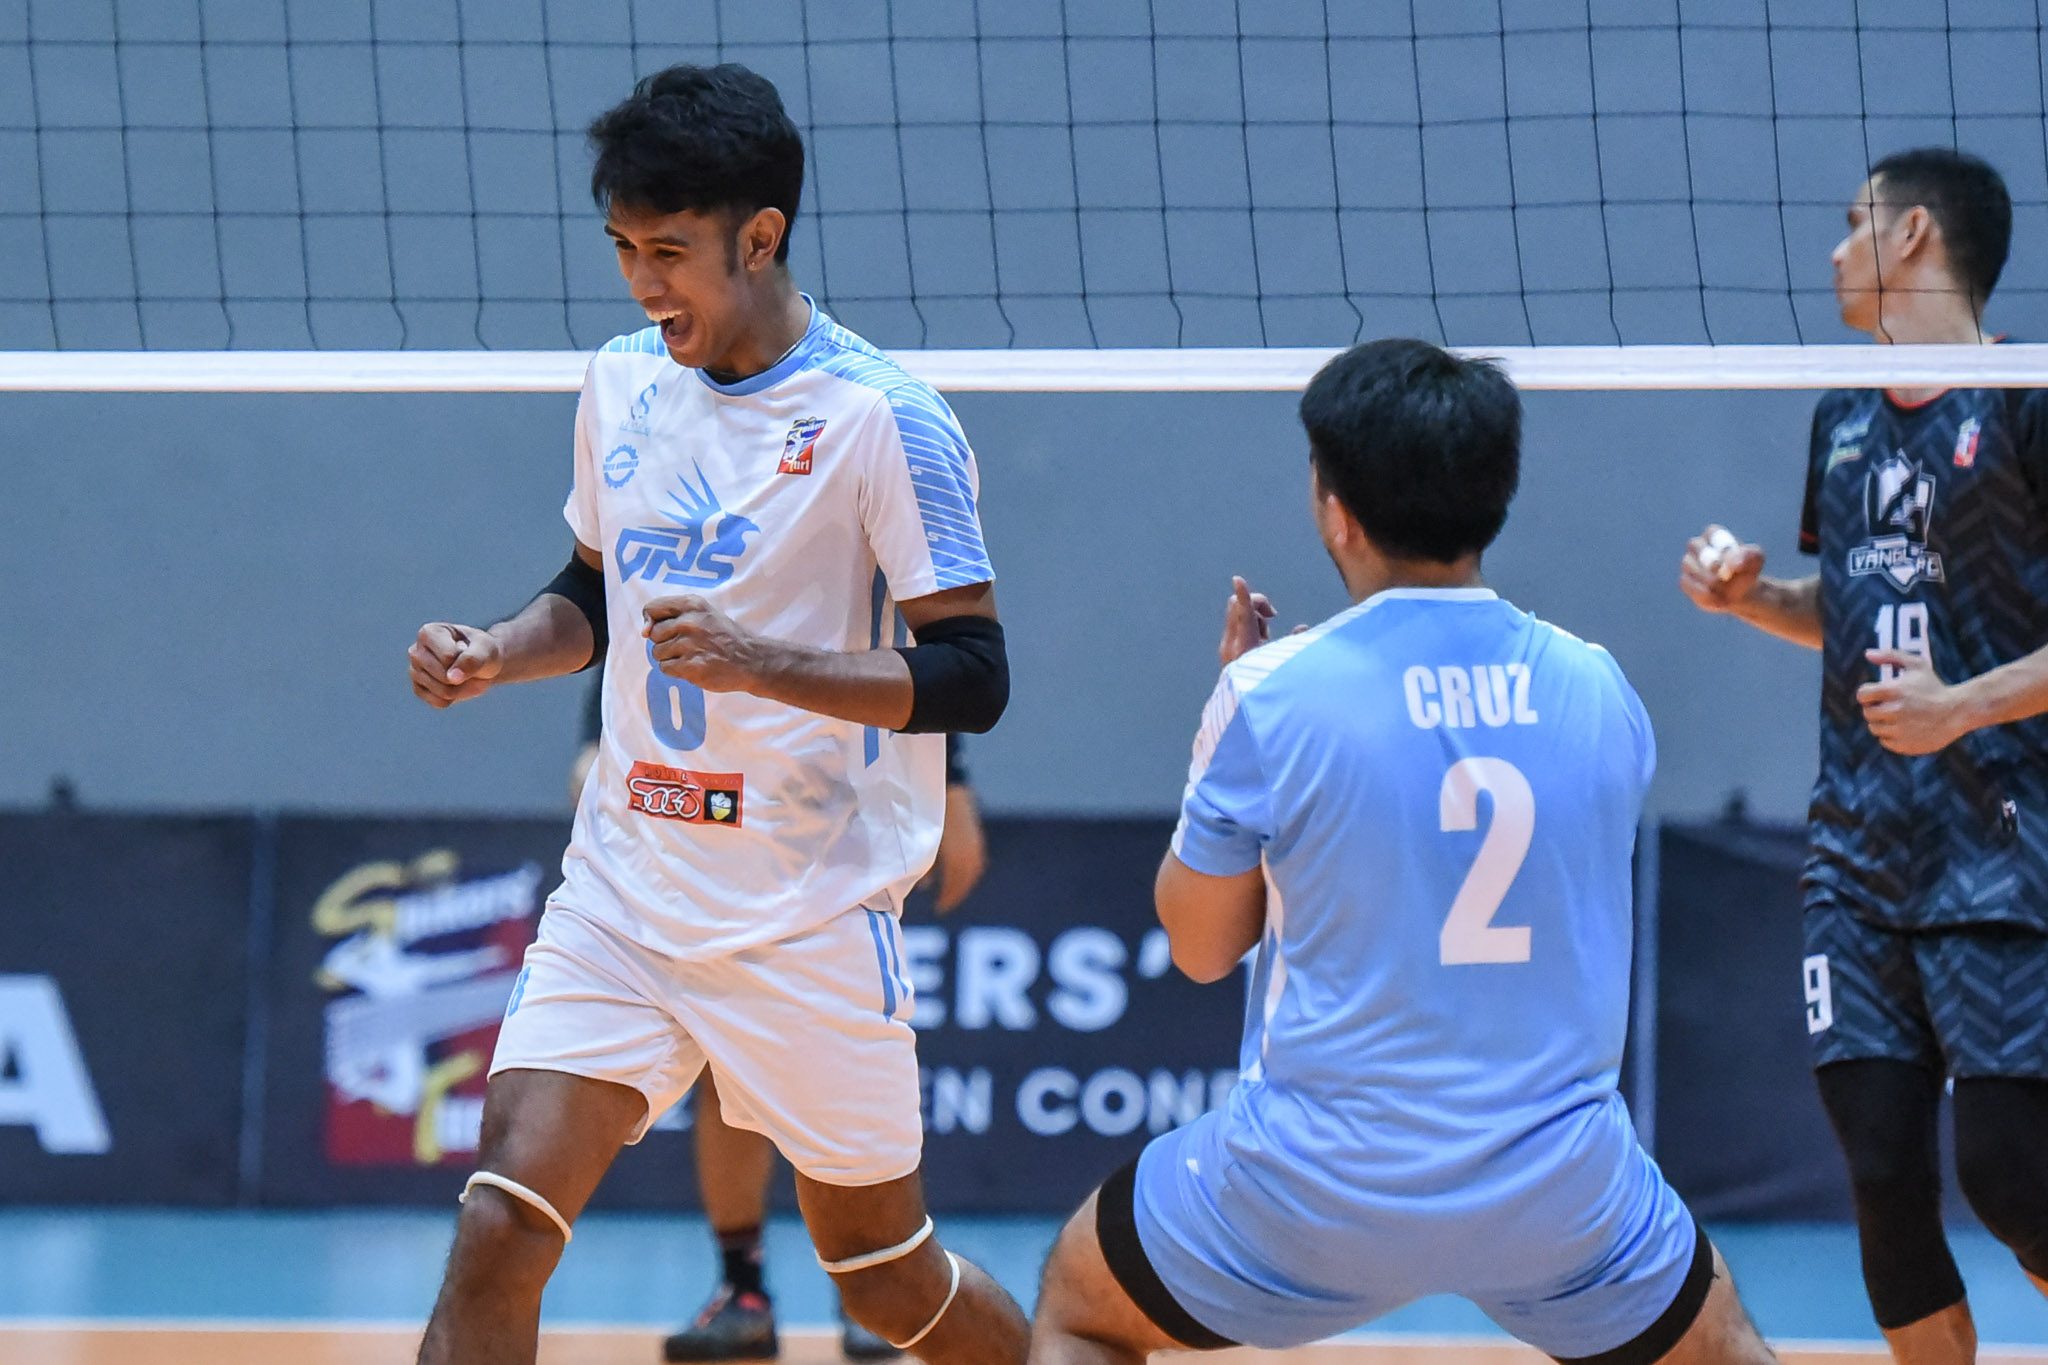 VNS sweeps Vanguard after 30-point set 2 escape; Cotabato fends off Army in 4